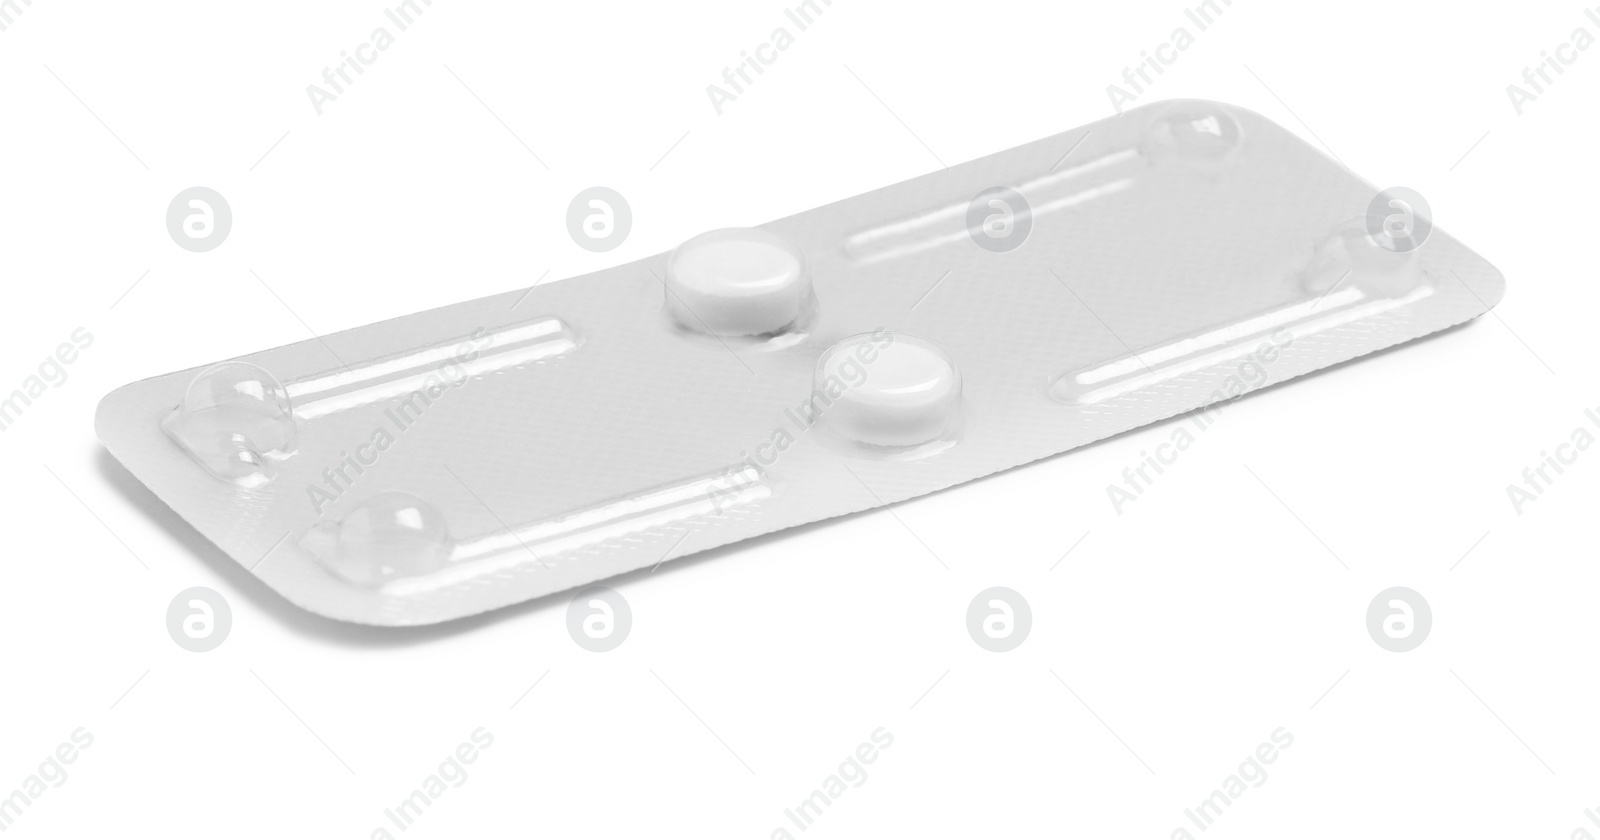 Photo of Blister of emergency contraception pills isolated on white